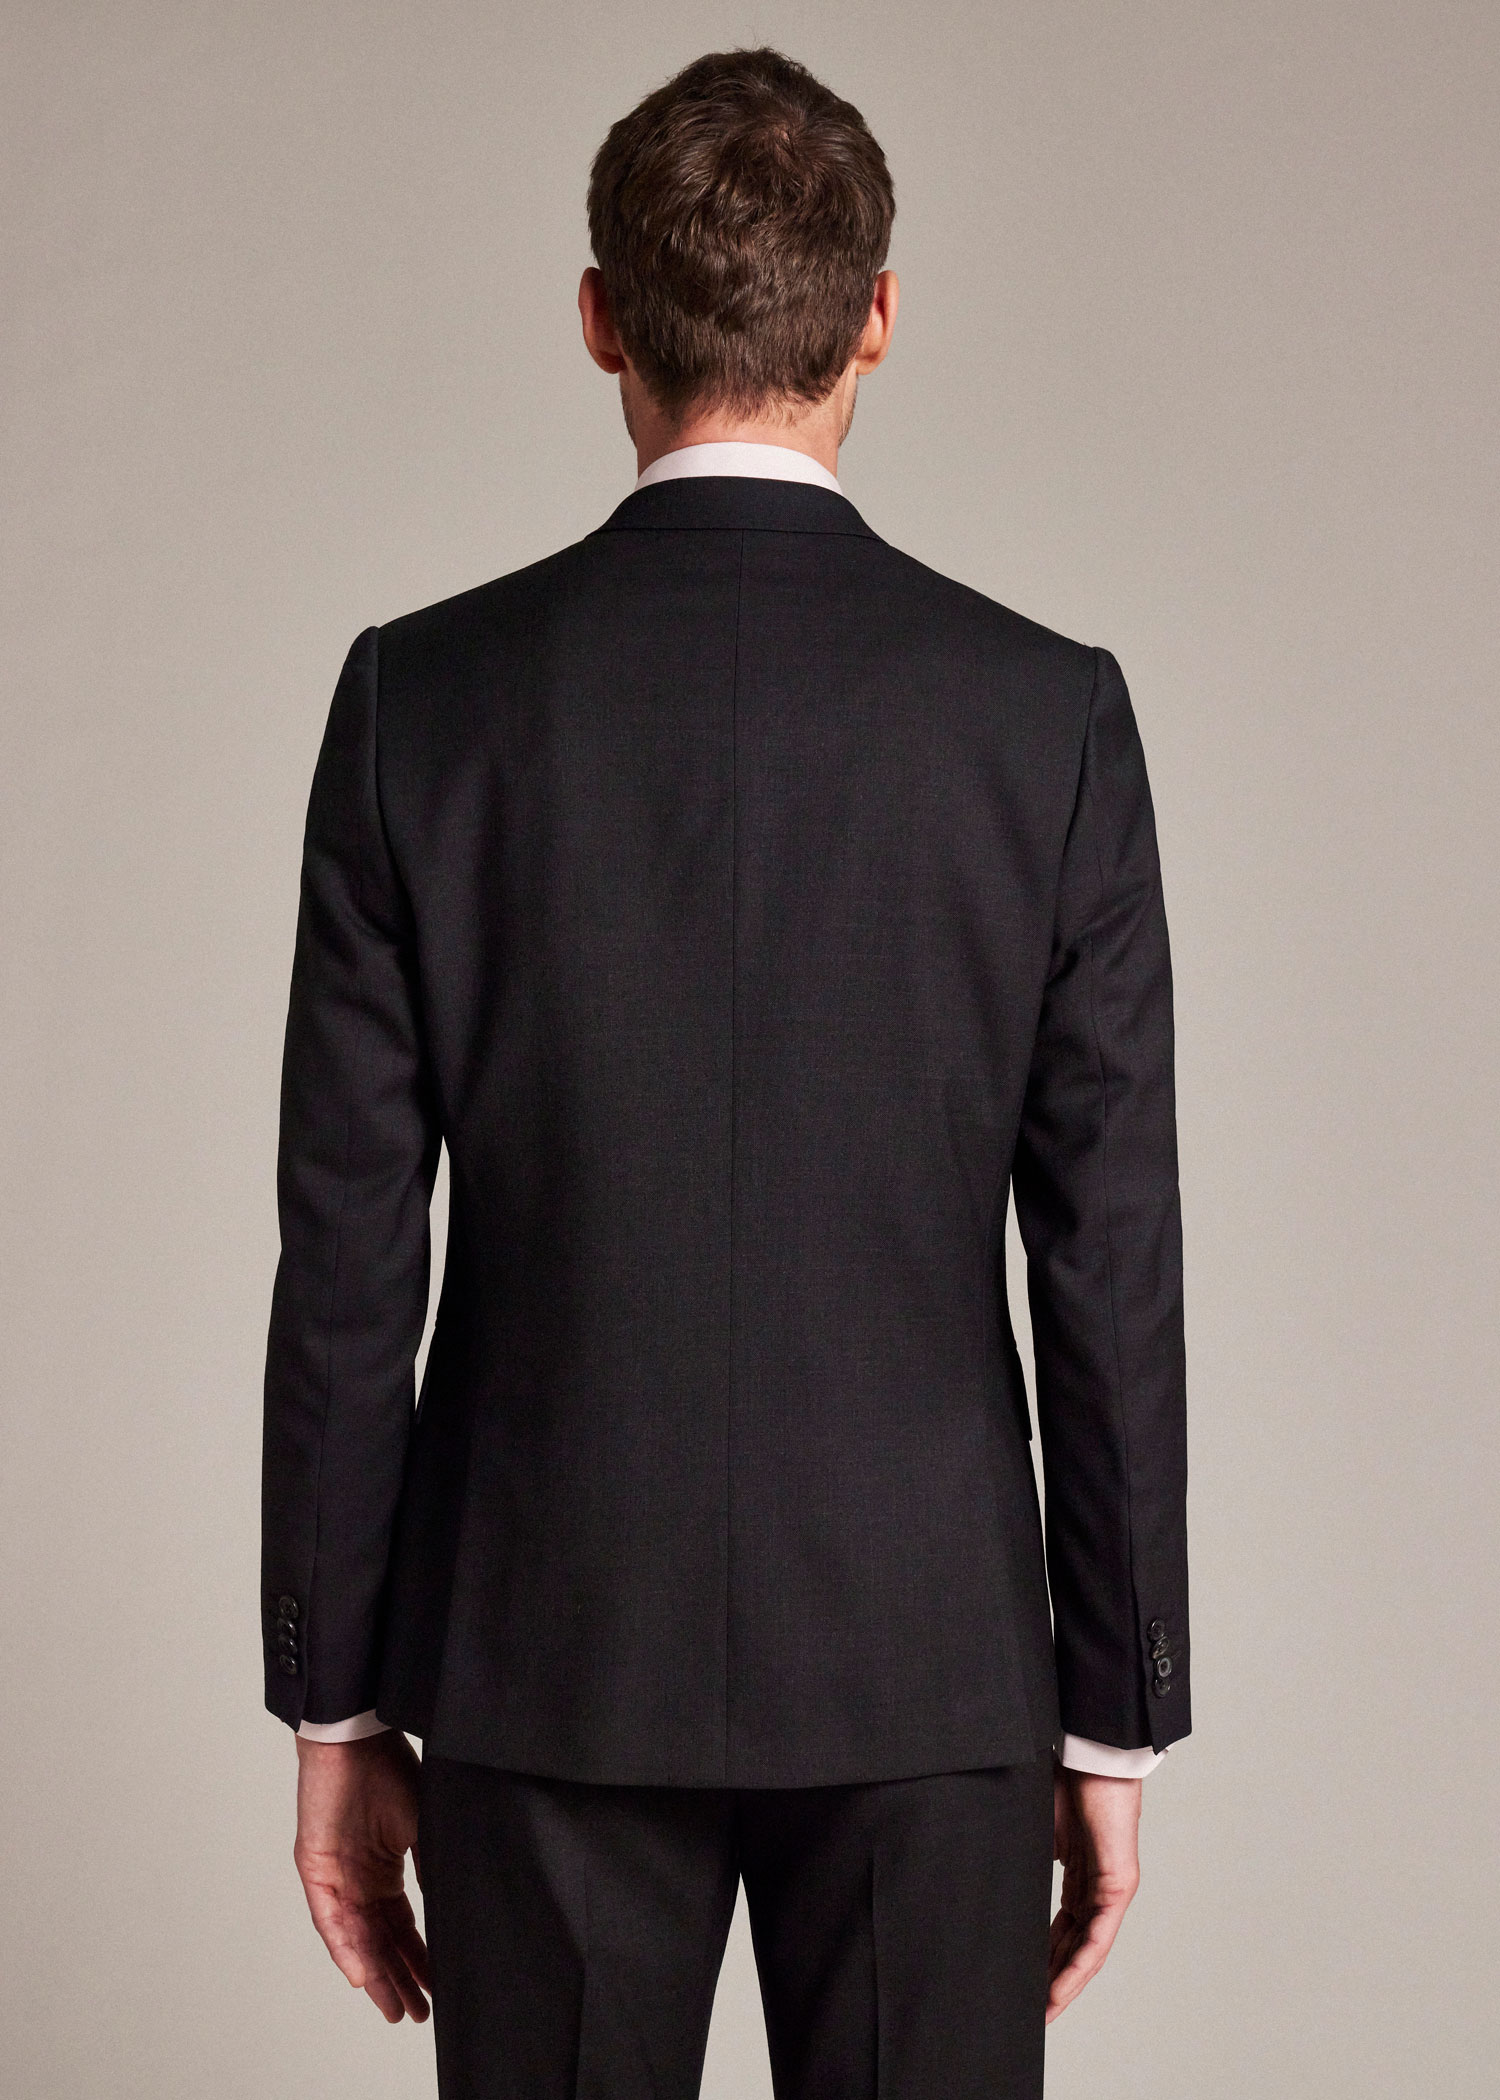 Designer Tailored-Fit Suits for Men | Paul Smith